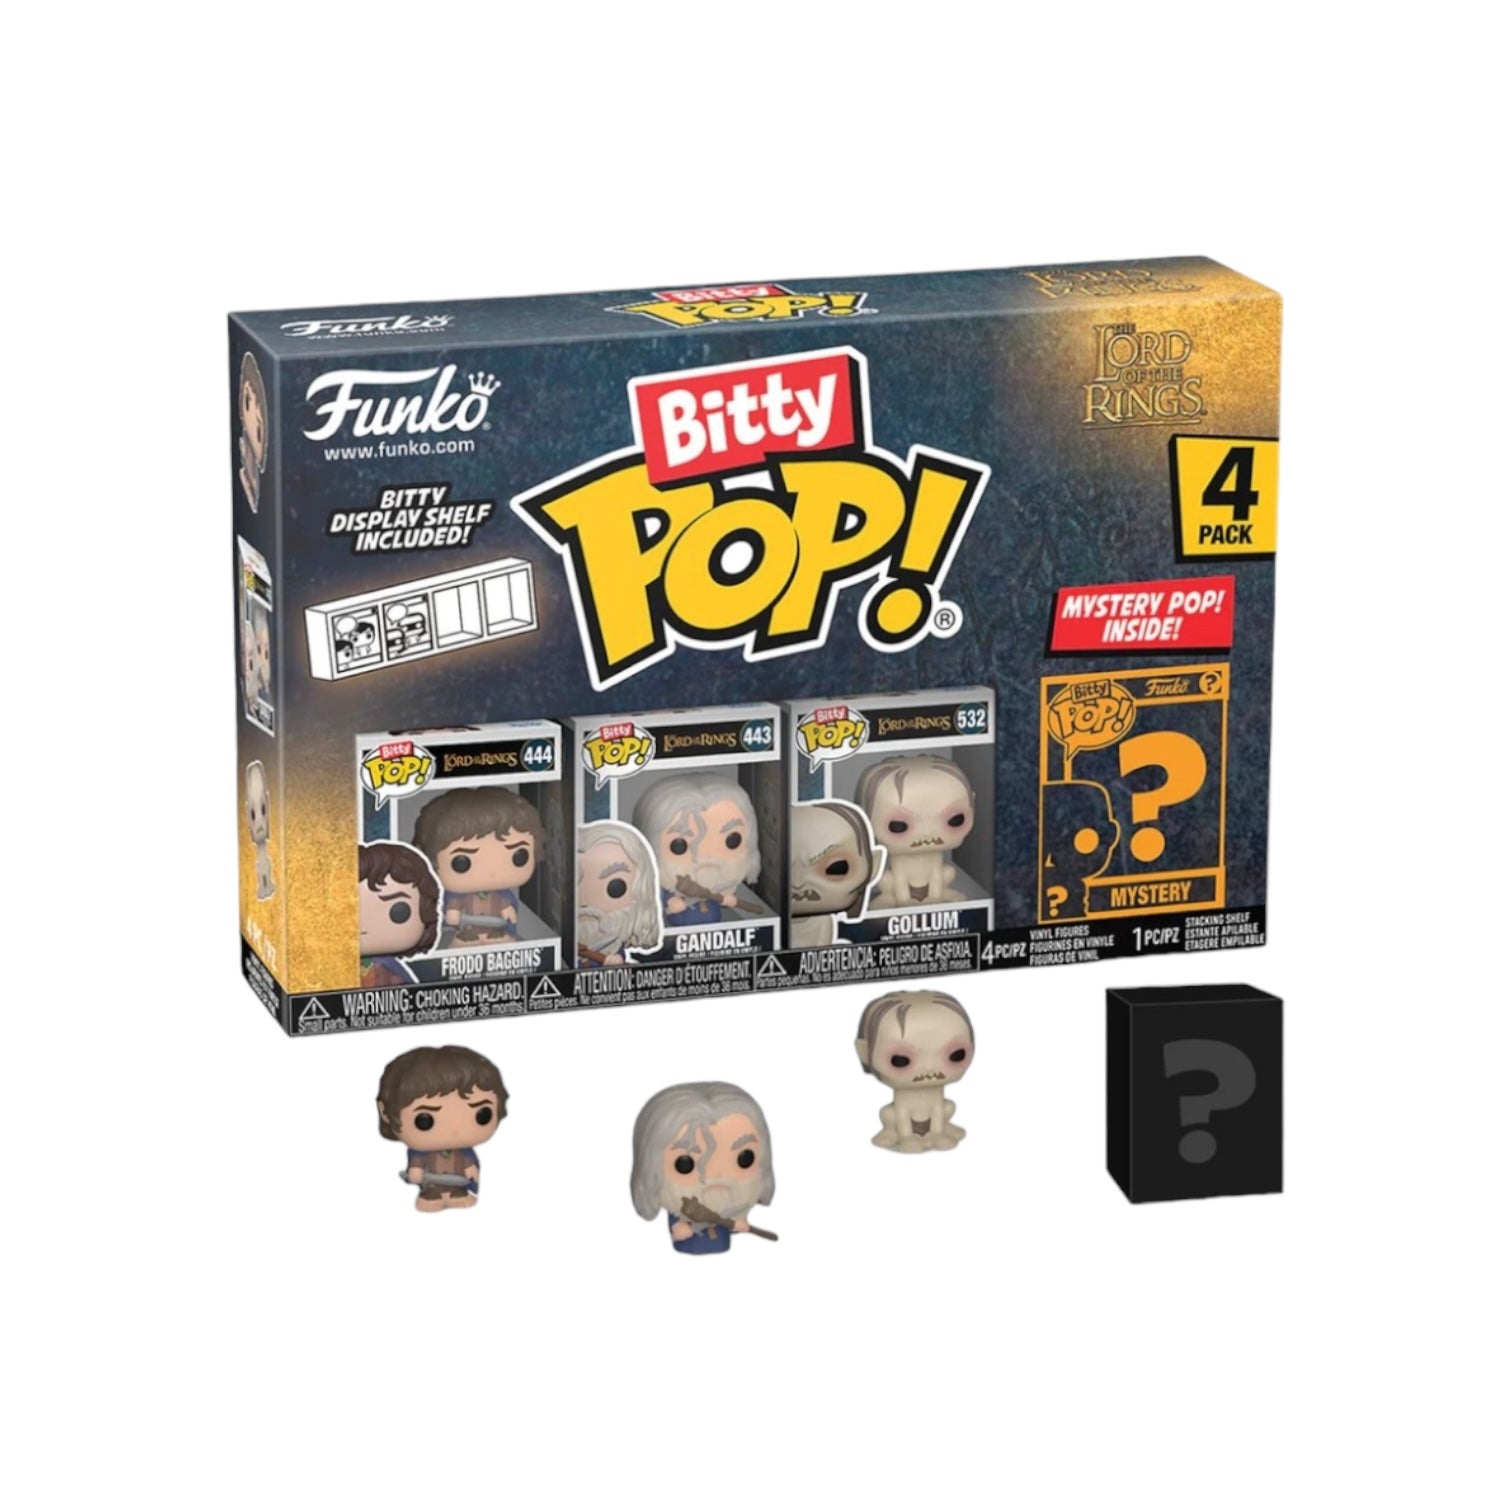 Frodo 4 Pack Bitty Funko Pop! - Lord of the Rings - Chance Of Chase - PREORDER